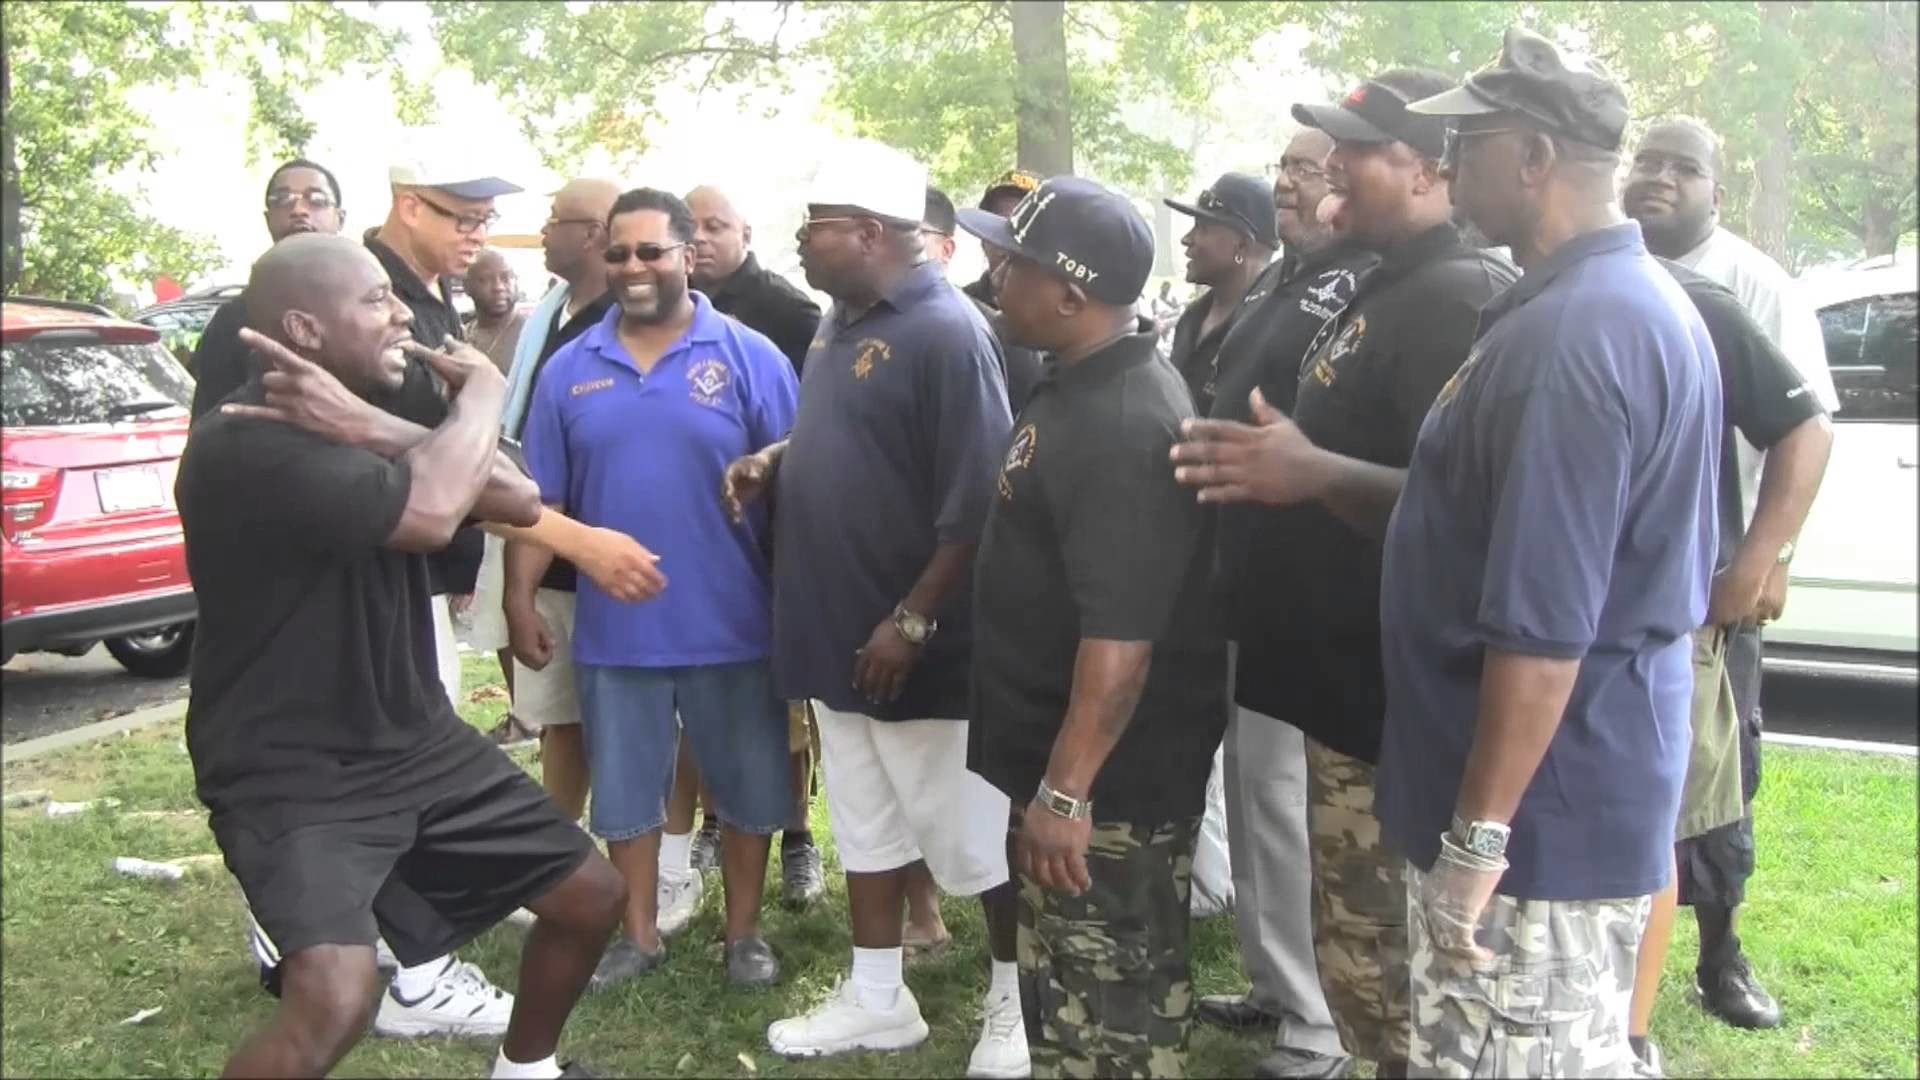 1920x1080 (PRINCE HALL TV) PERCY C MOORE ANNUAL LODGE COOKOUT - YouTube